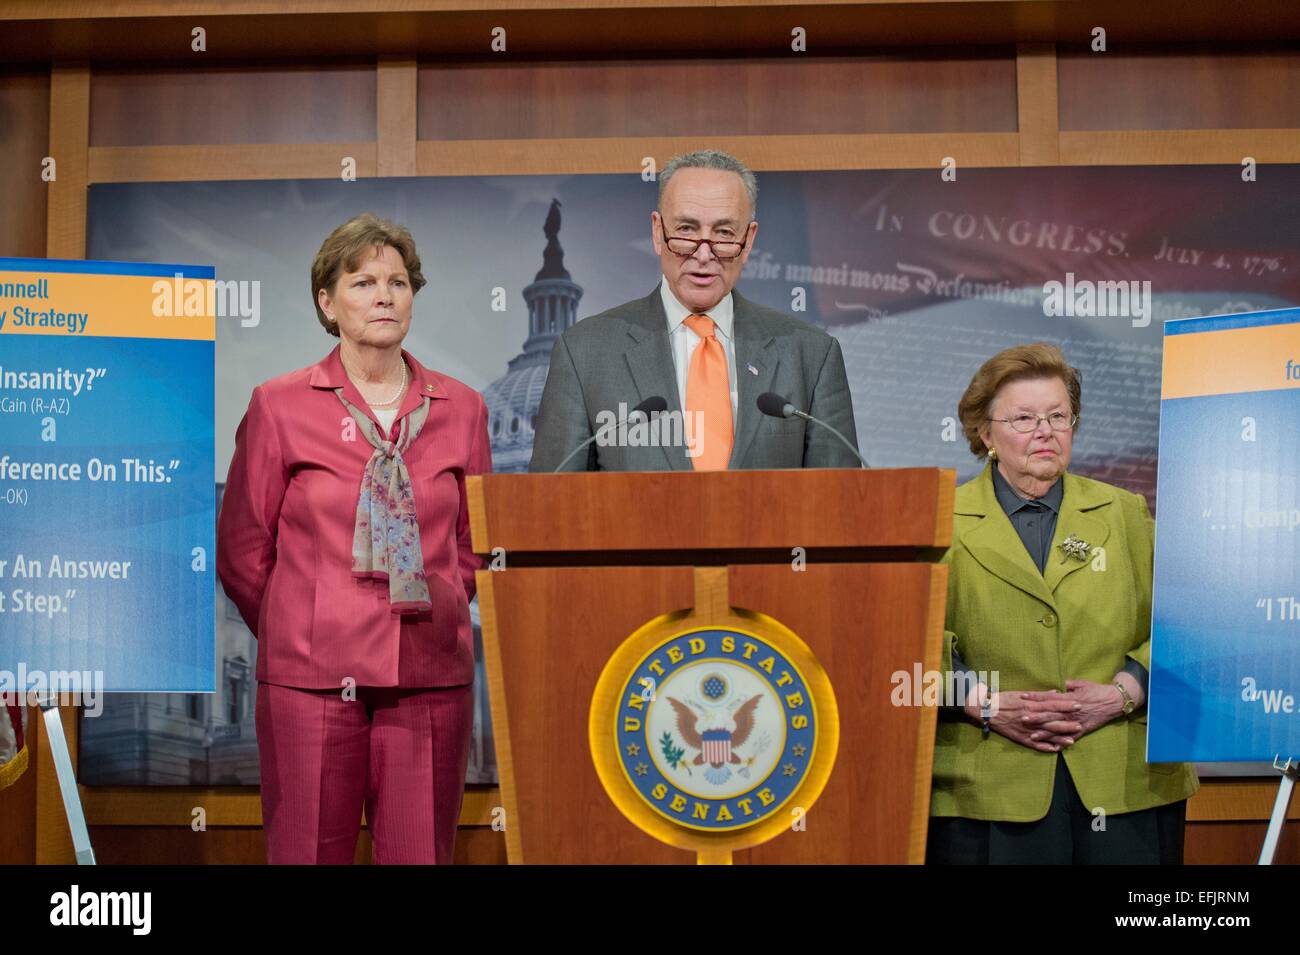 US Democratic Senator Chuck Schumer along with Senators Jeanne Shaheen and Barbara Mikulski during a press briefing following the defeat of a third DHS funding bill by Republicans February 5, 2015 in Washington, DC. Stock Photo